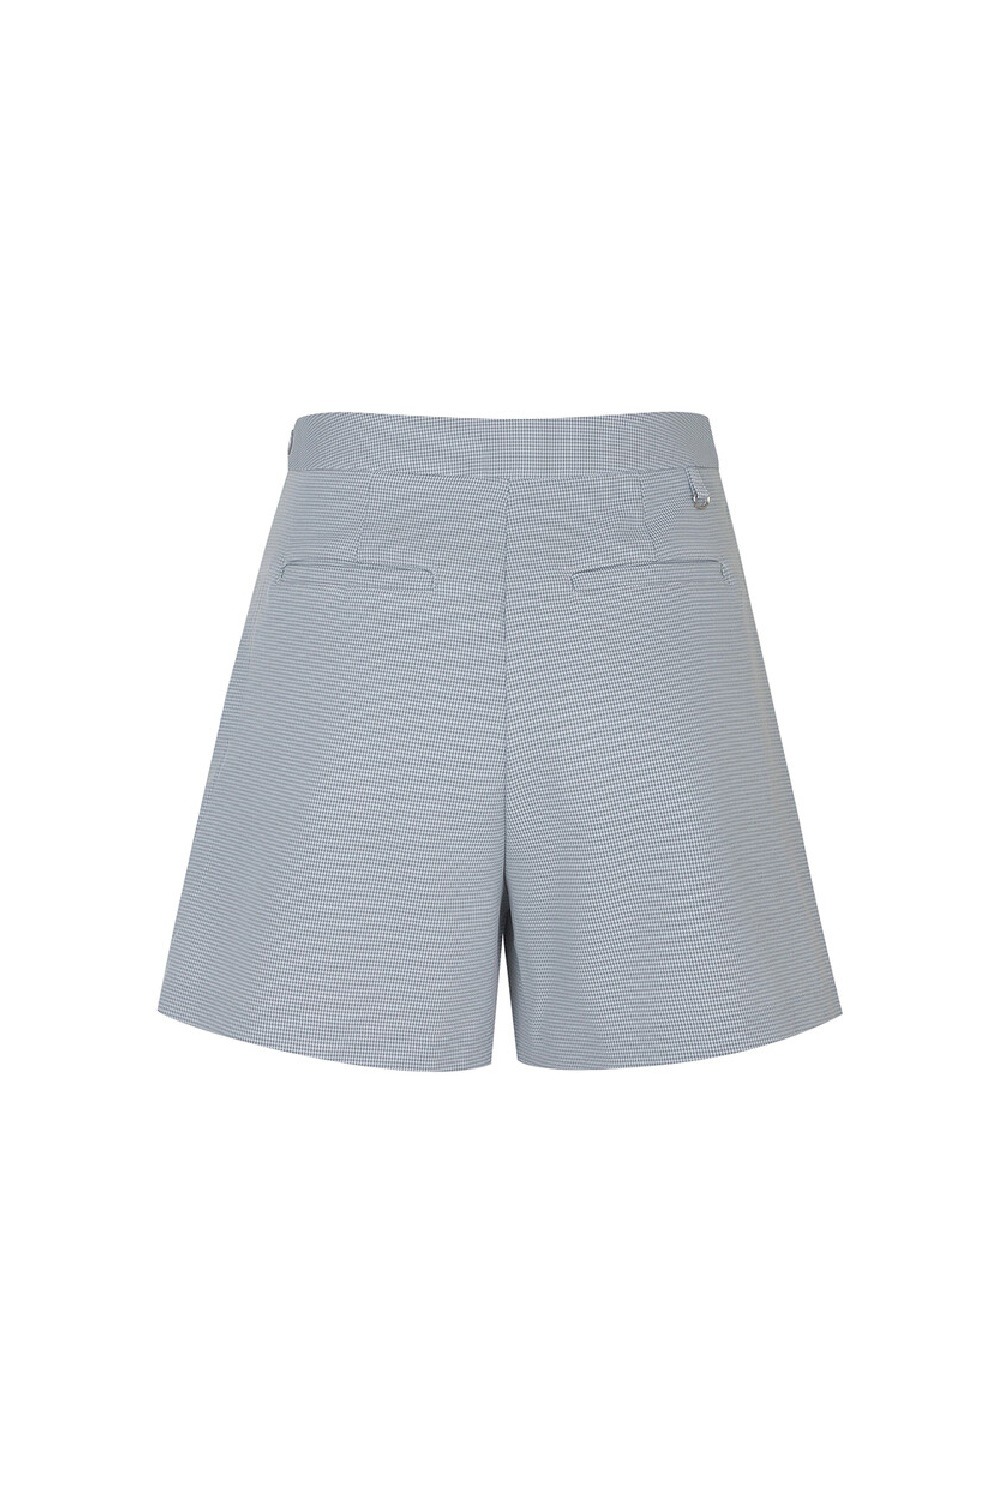 ESSENTIAL HOUNDSTOOTH SHORTS W/INNER PANTS_Grey